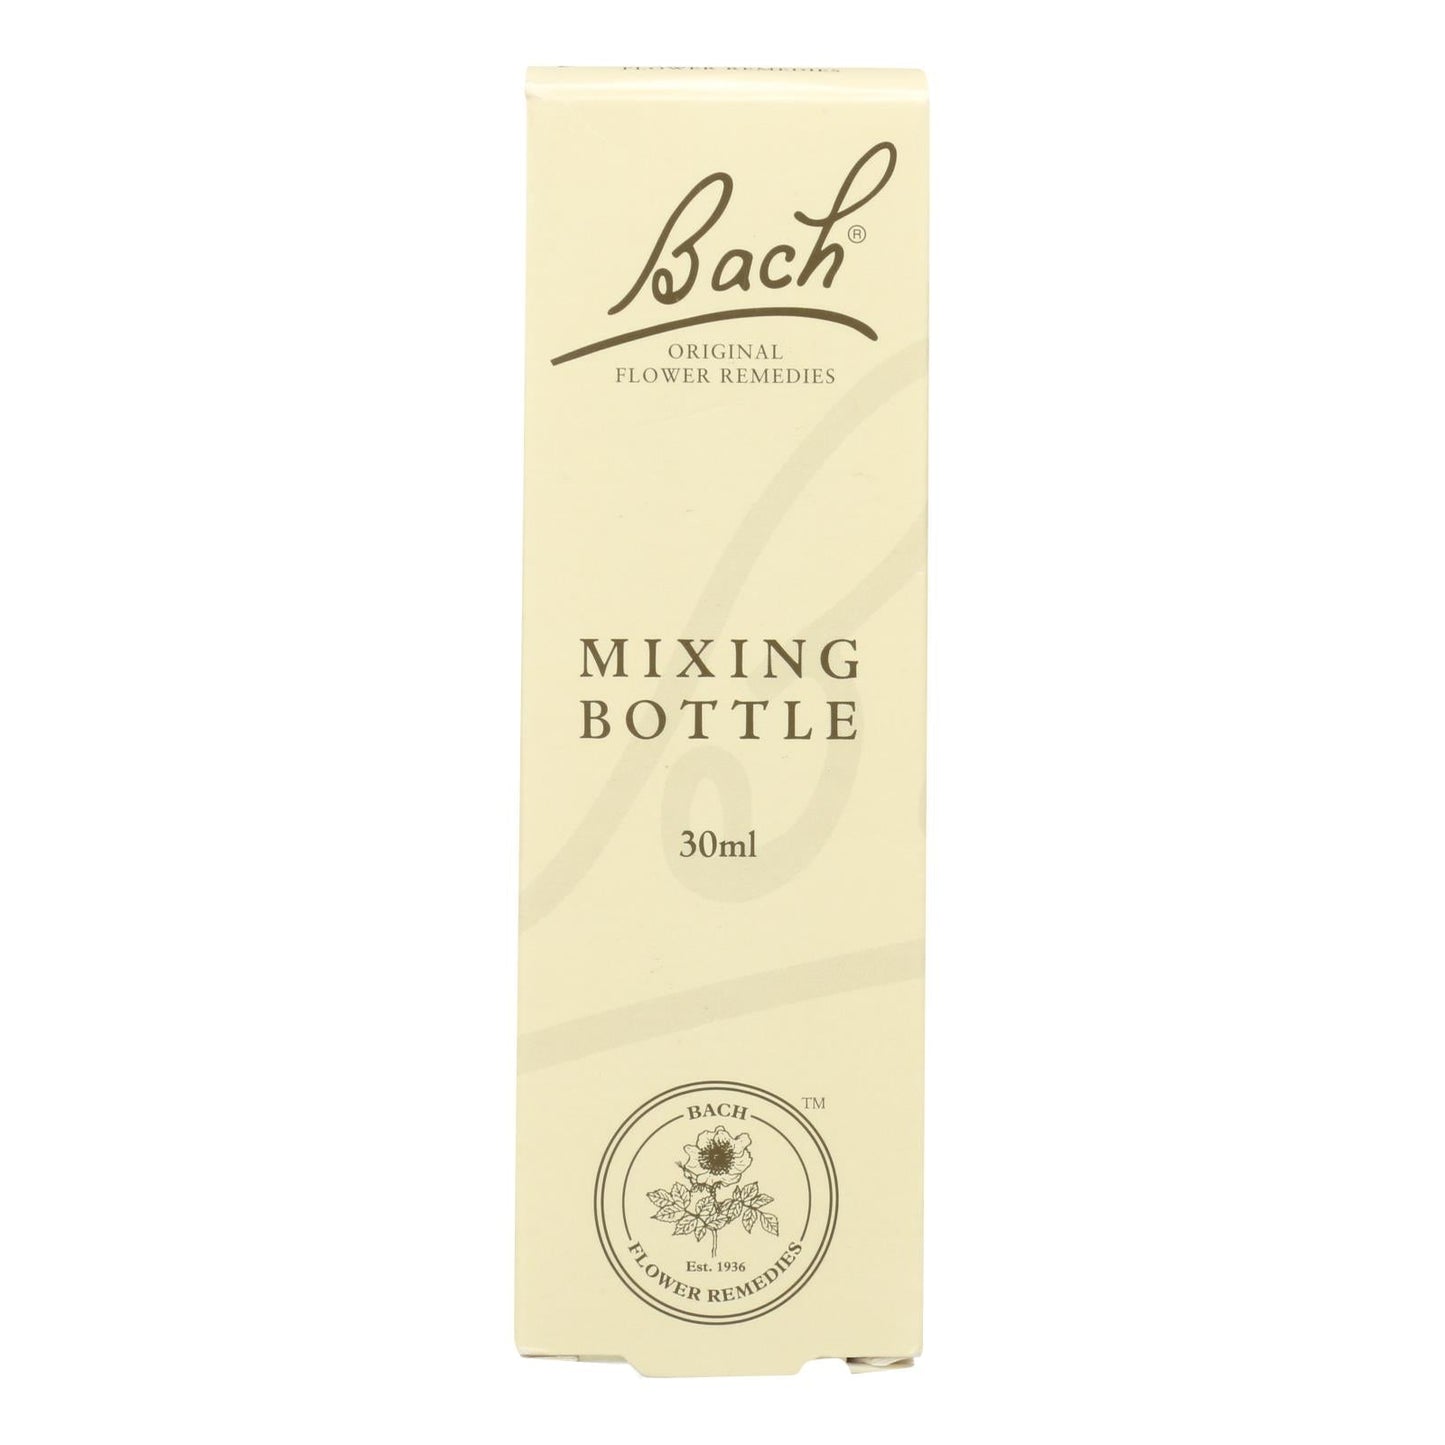 Buy Bach Flower Remedies Mixing Bottle - 30 Ml  at OnlyNaturals.us